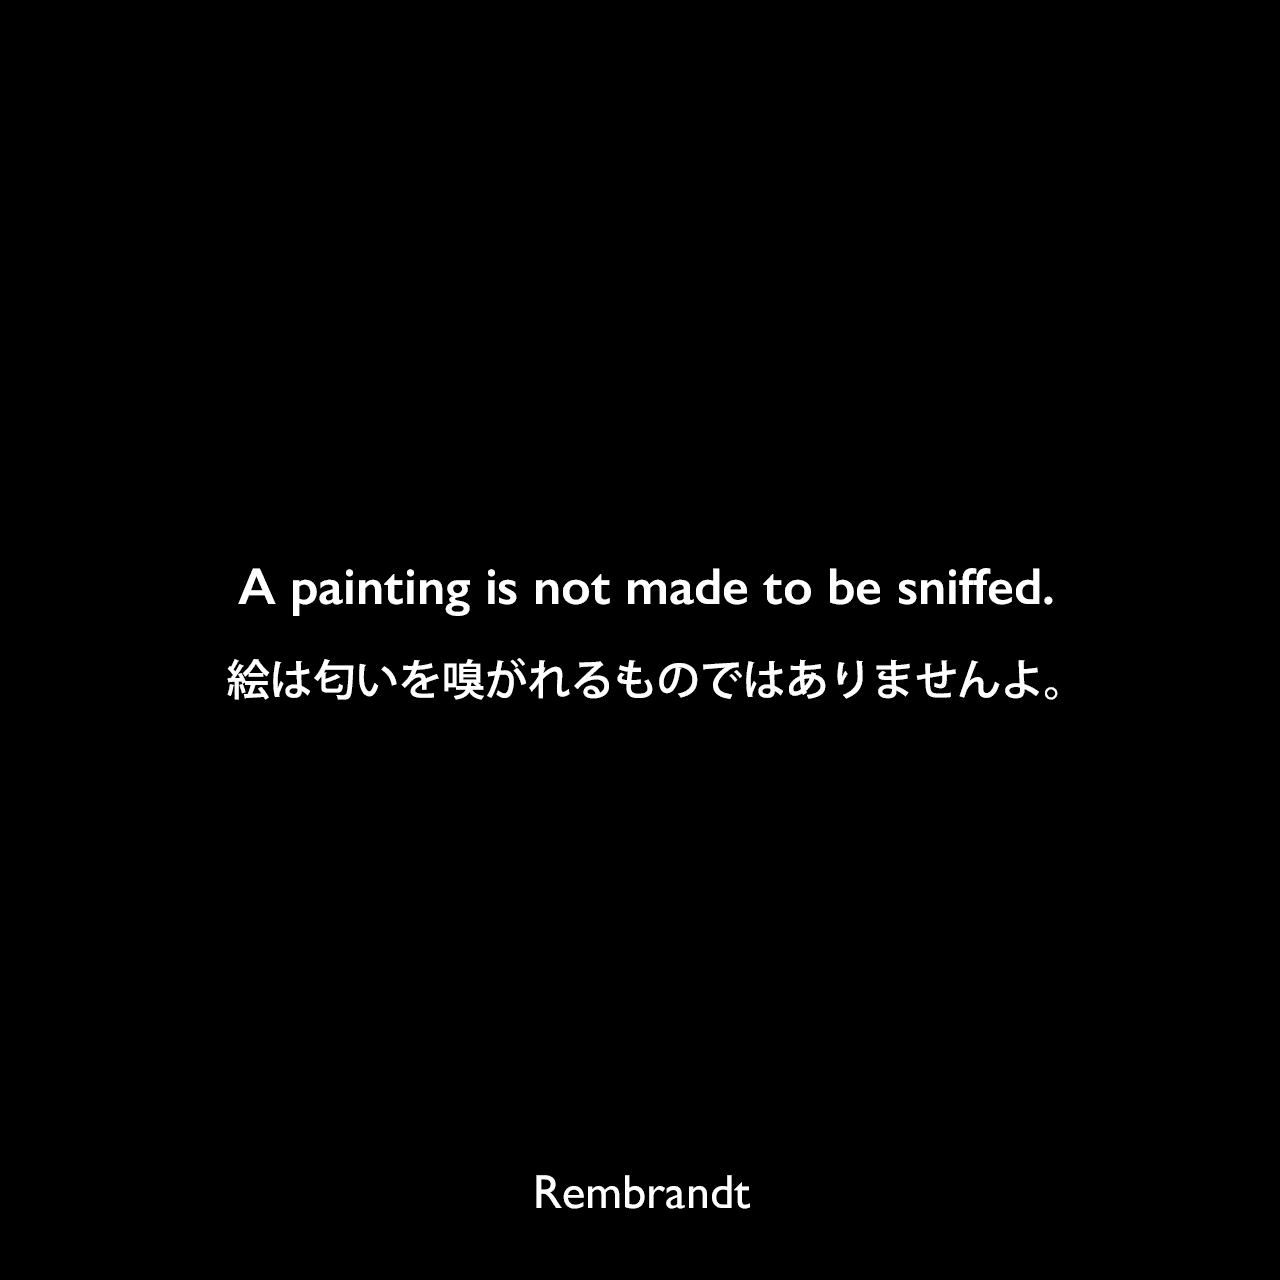 A painting is not made to be sniffed.絵は匂いを嗅がれるものではありませんよ。Rembrandt